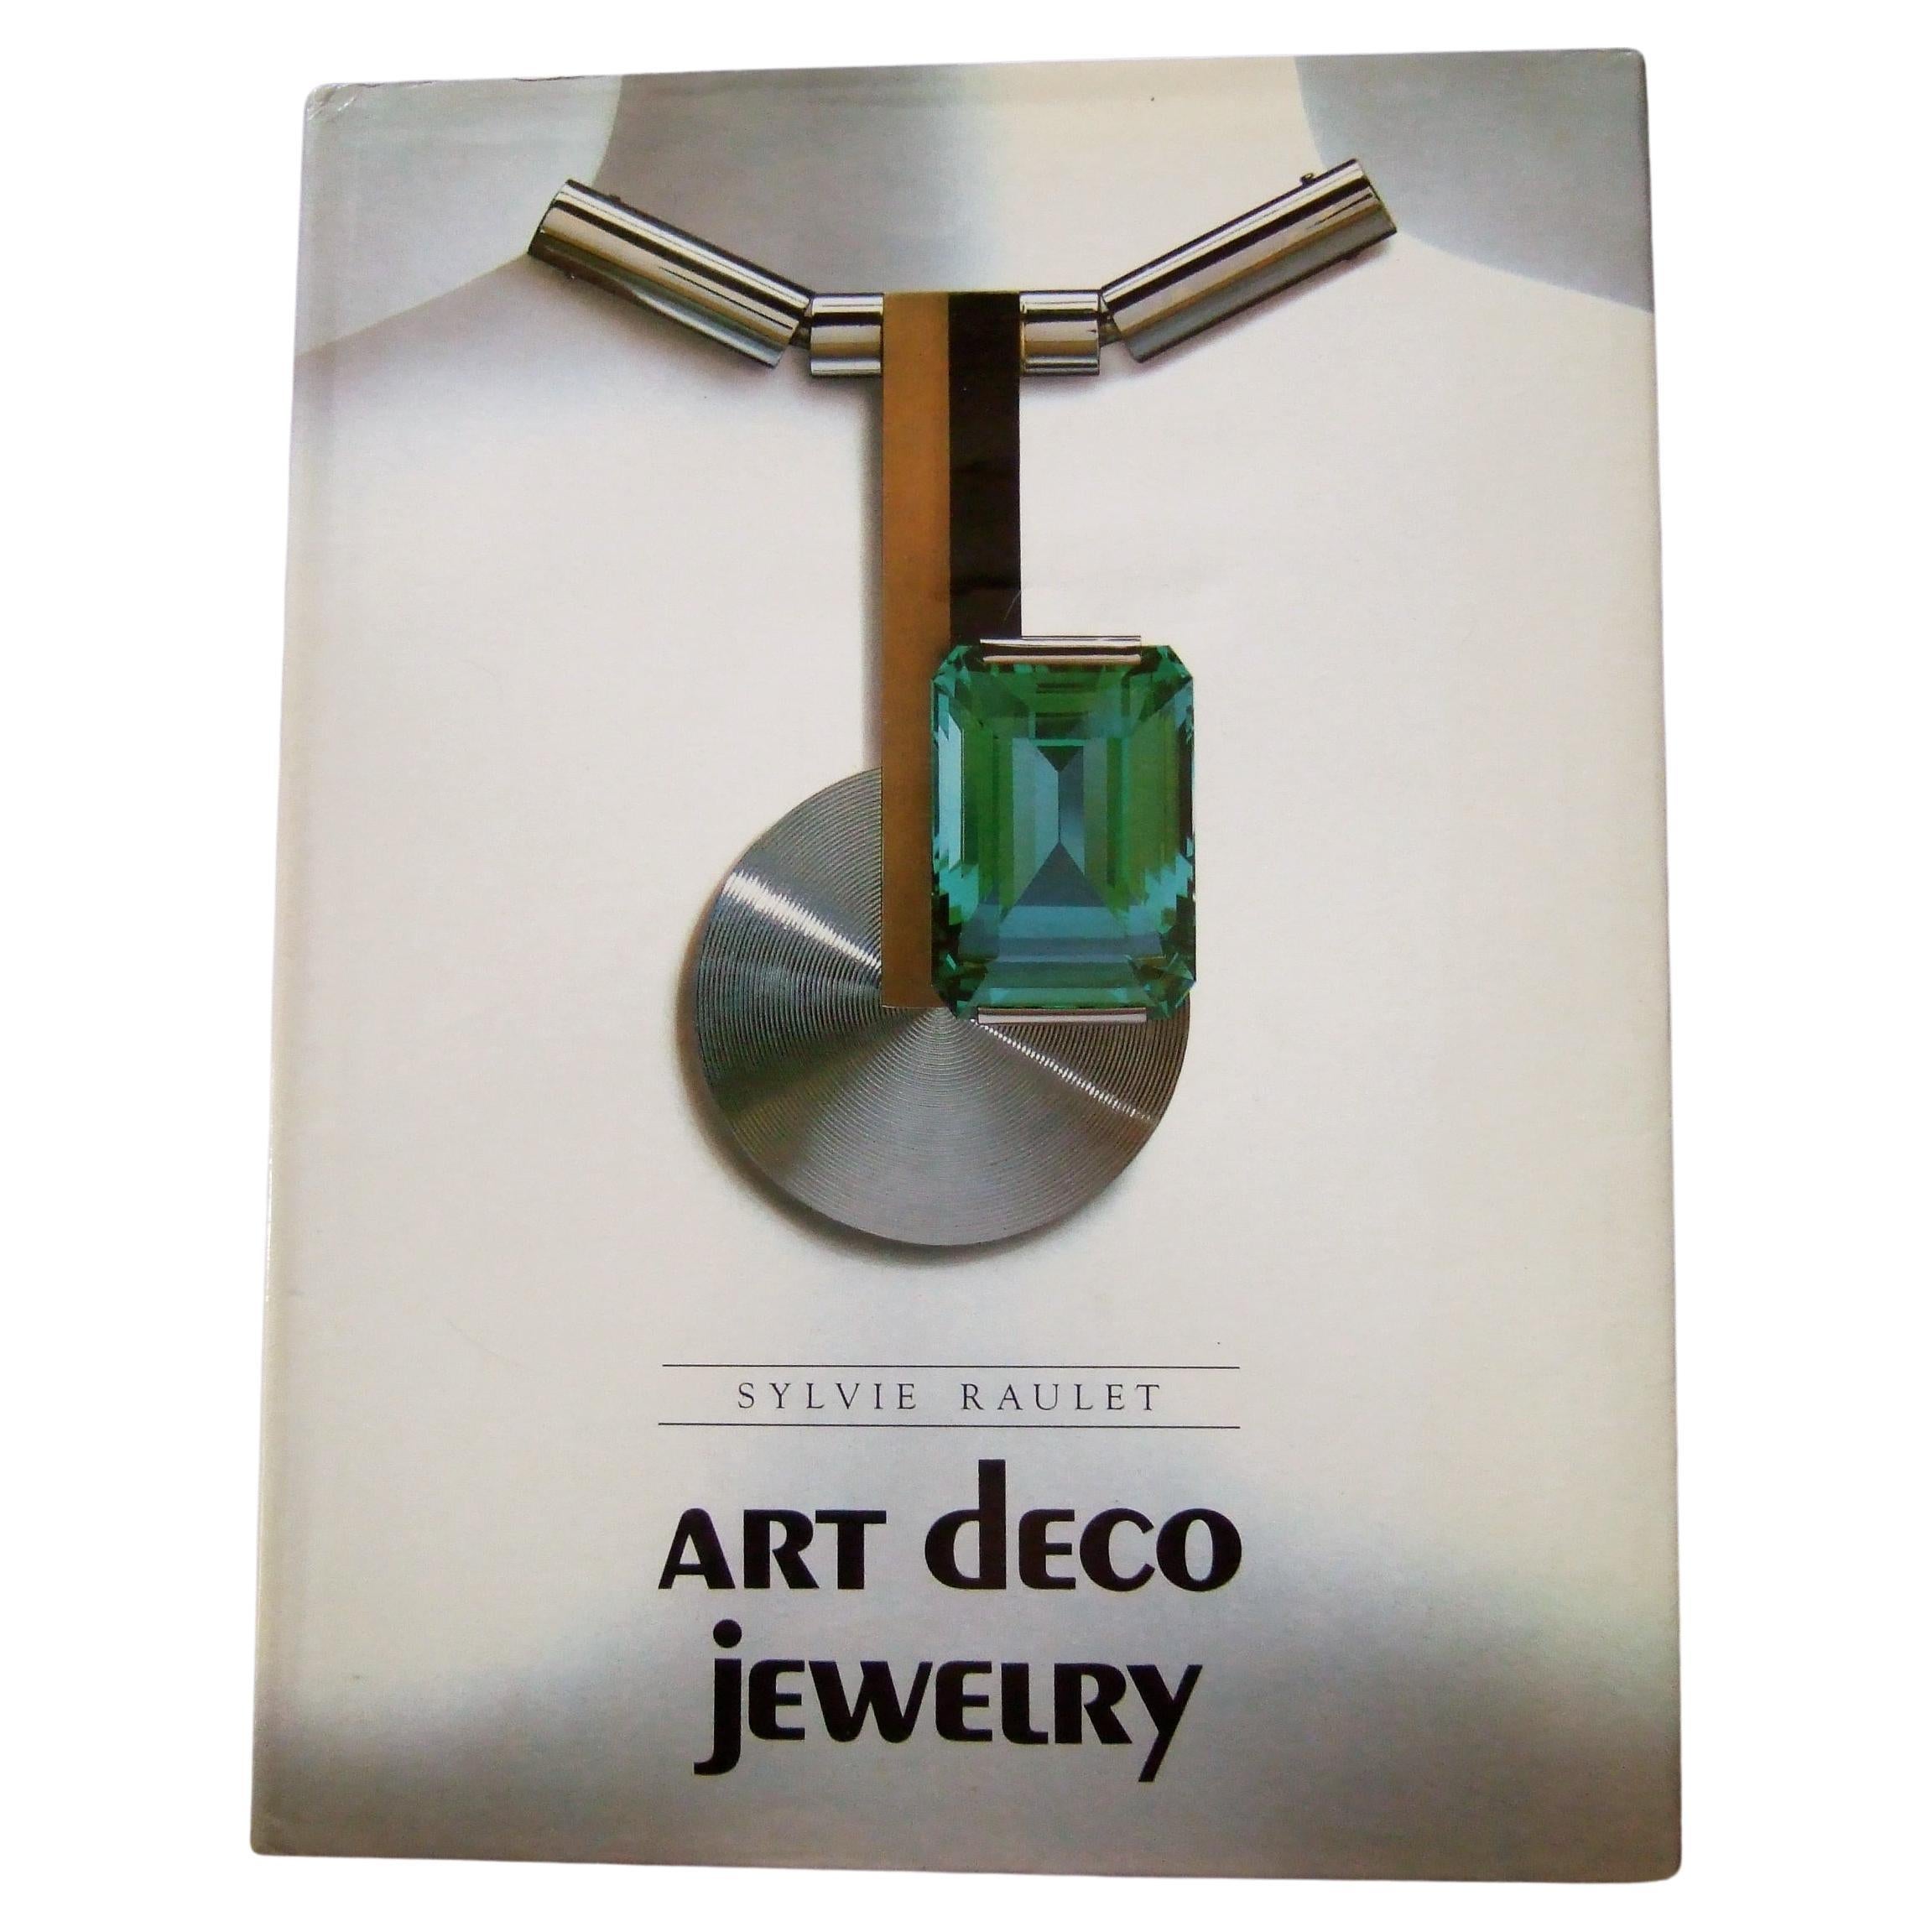 Rare Hard Cover Art Deco Jewelry Book from Rizzoli by Sylvie Raulet c 1984 